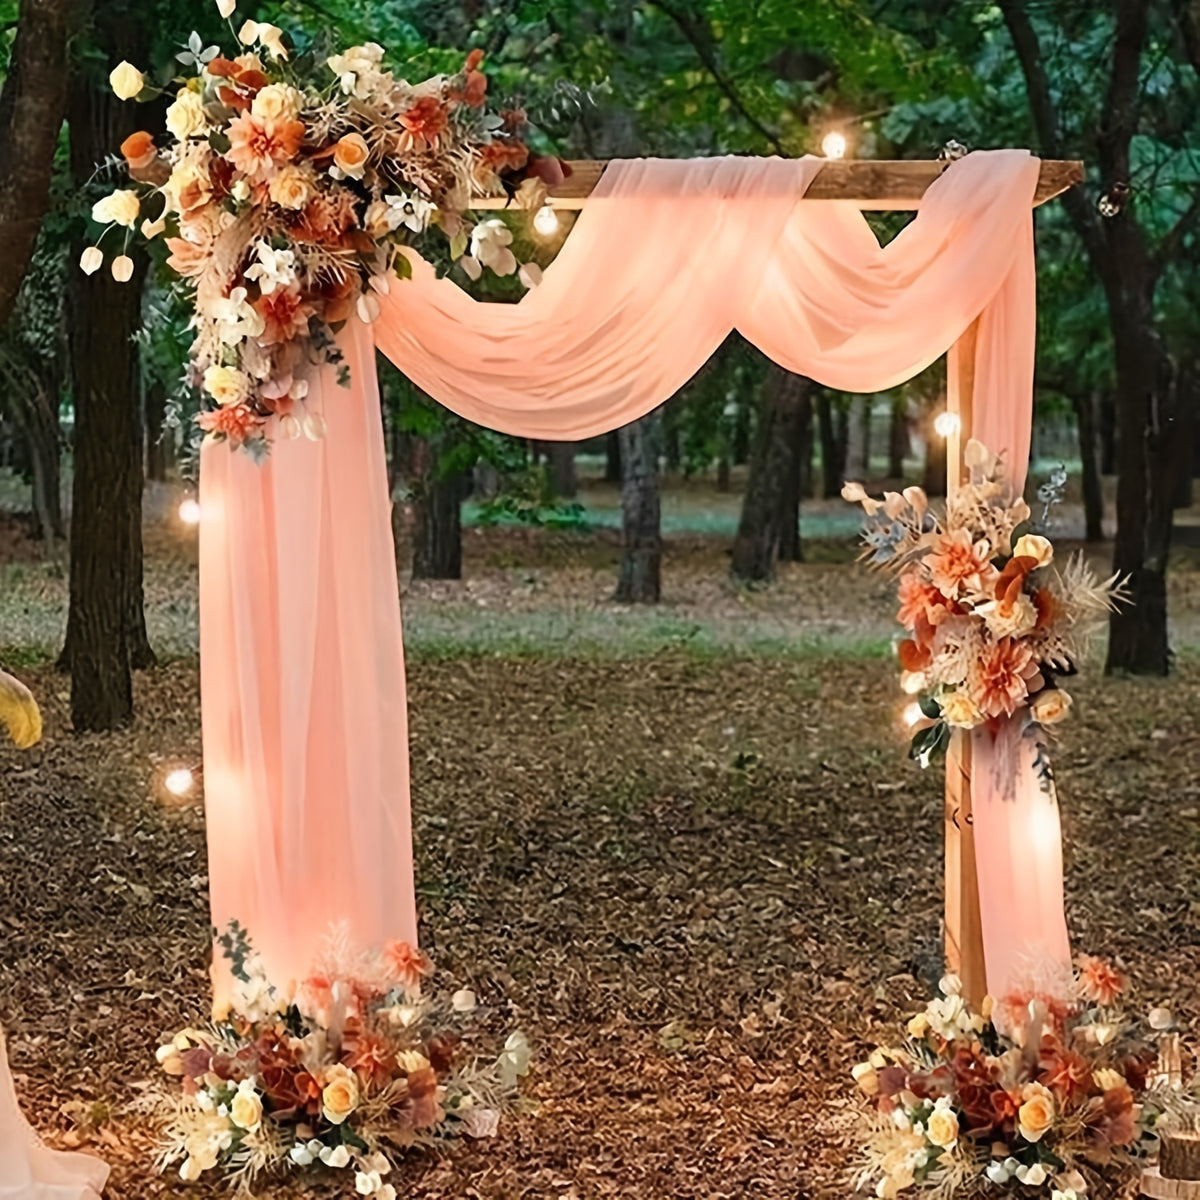 a wedding arch decorated with flowers and lights